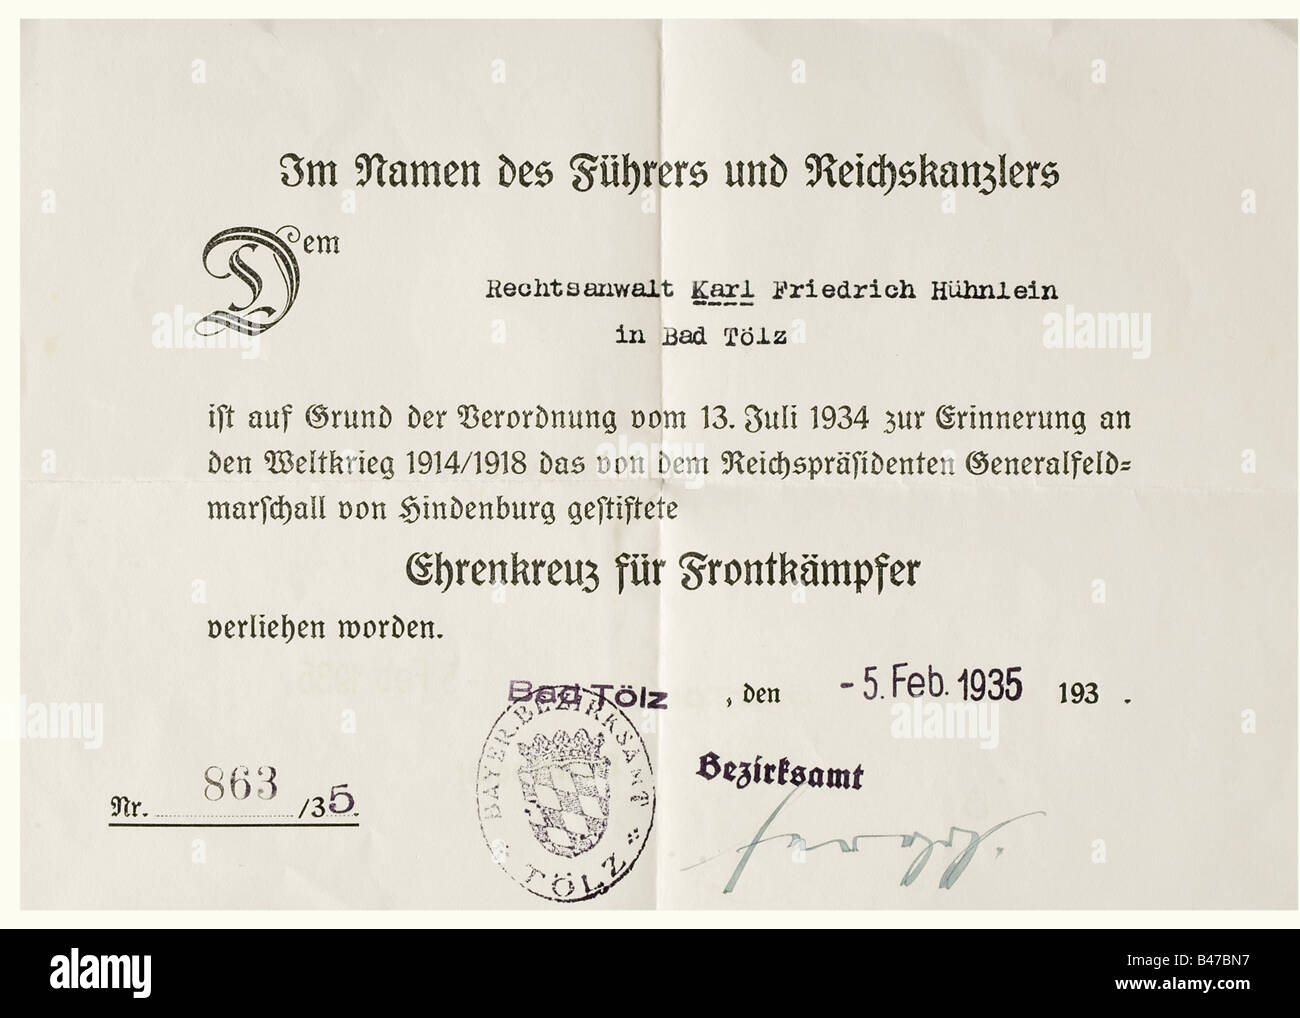 Ehrenzeichen vom 8./9. November 1923 (Blood Order), award document, 1st type, 1933 Monochrome printed, single-sided award certificate on thin, yellowish cardboard, 22.2 x 31.7 cm, at the top is a photographic depiction of the medal awarded to Karl Hühnlein (registration number 407), dated November 1933, facsimile signature of Hitler in lower portion. Small warp, traces of glue from a former mounting. Included is an award certificate for the Cross of Honour for Front Fighters, 1935. Karl Hühnlein (b. 10 May 1900), nephew of the NSKK leader Adolf Hühnlein, was a , Stock Photo